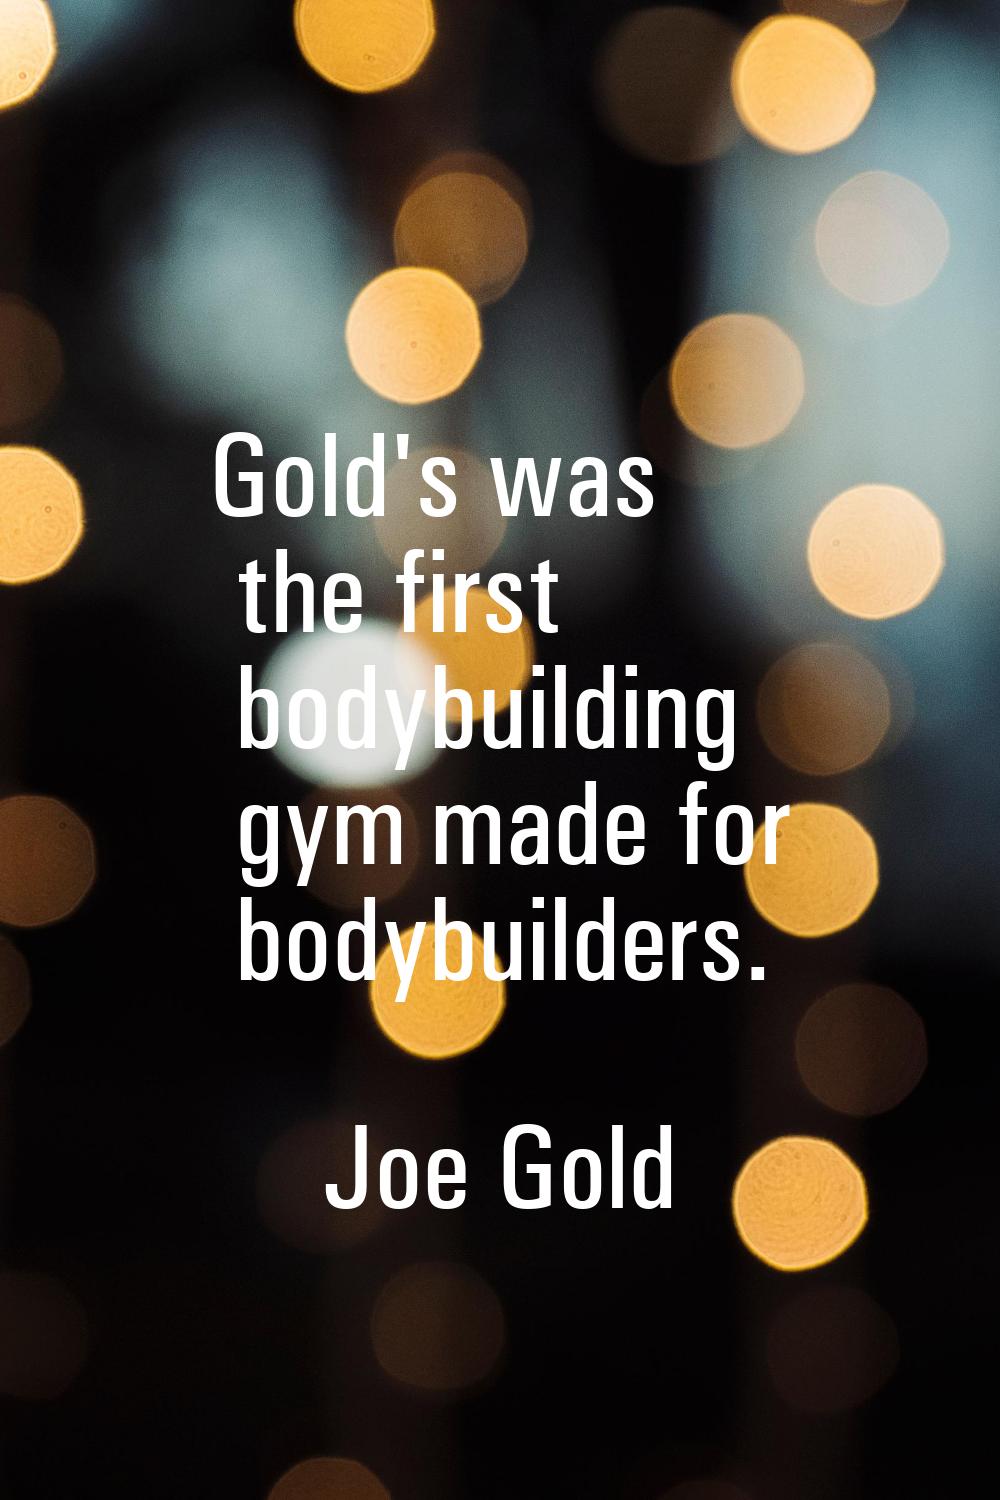 Gold's was the first bodybuilding gym made for bodybuilders.